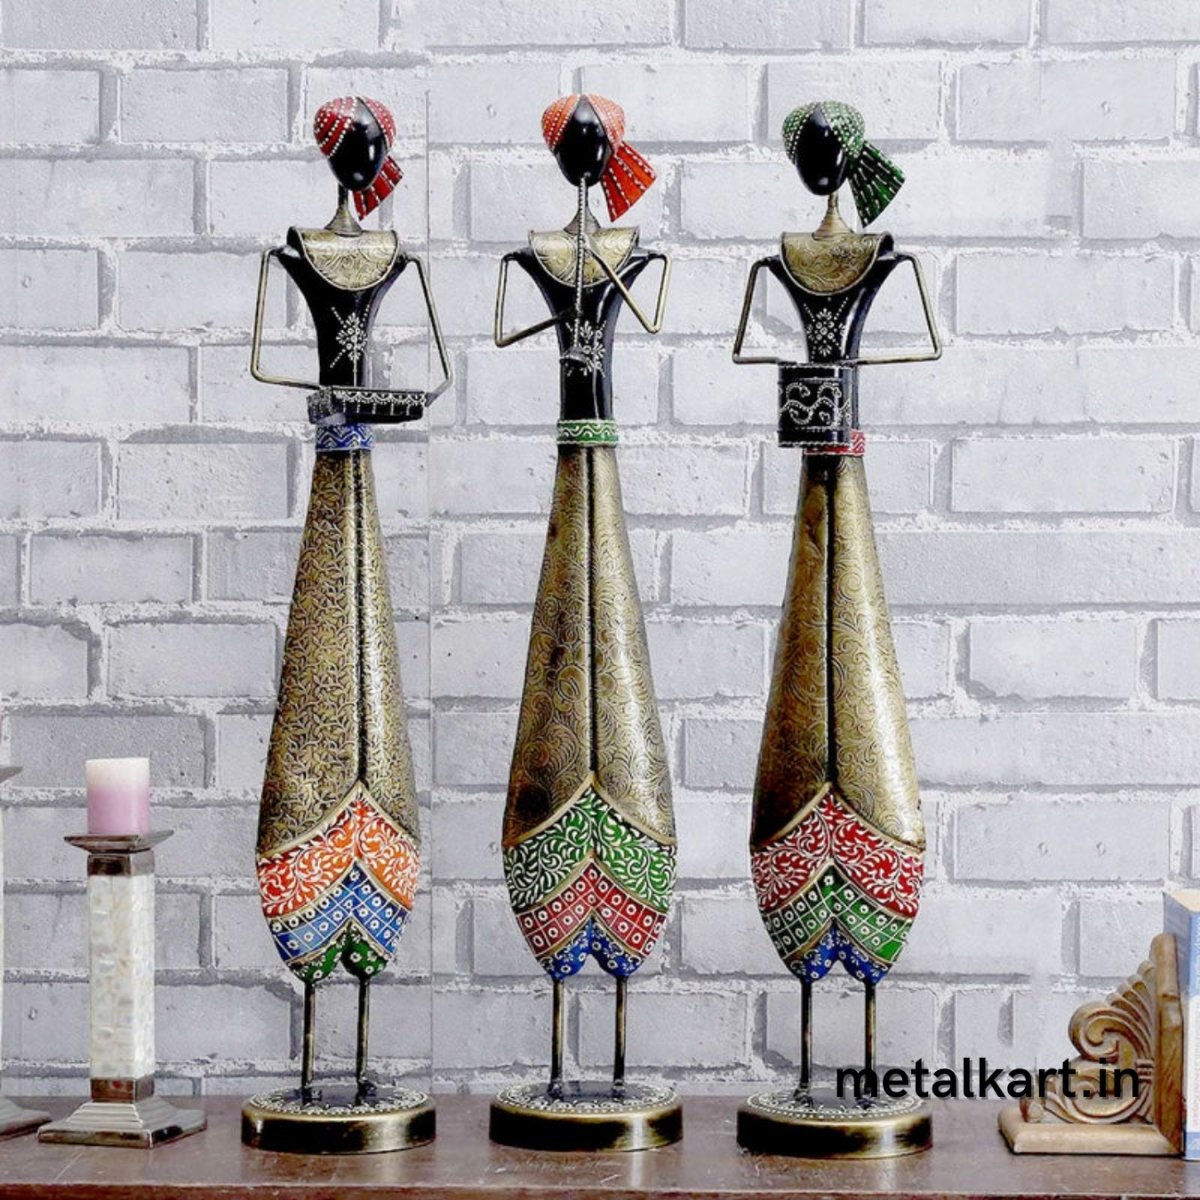 Metalkart Special 3 Hardworking Musicians group For living room ( 8*6*31 Inches approx)